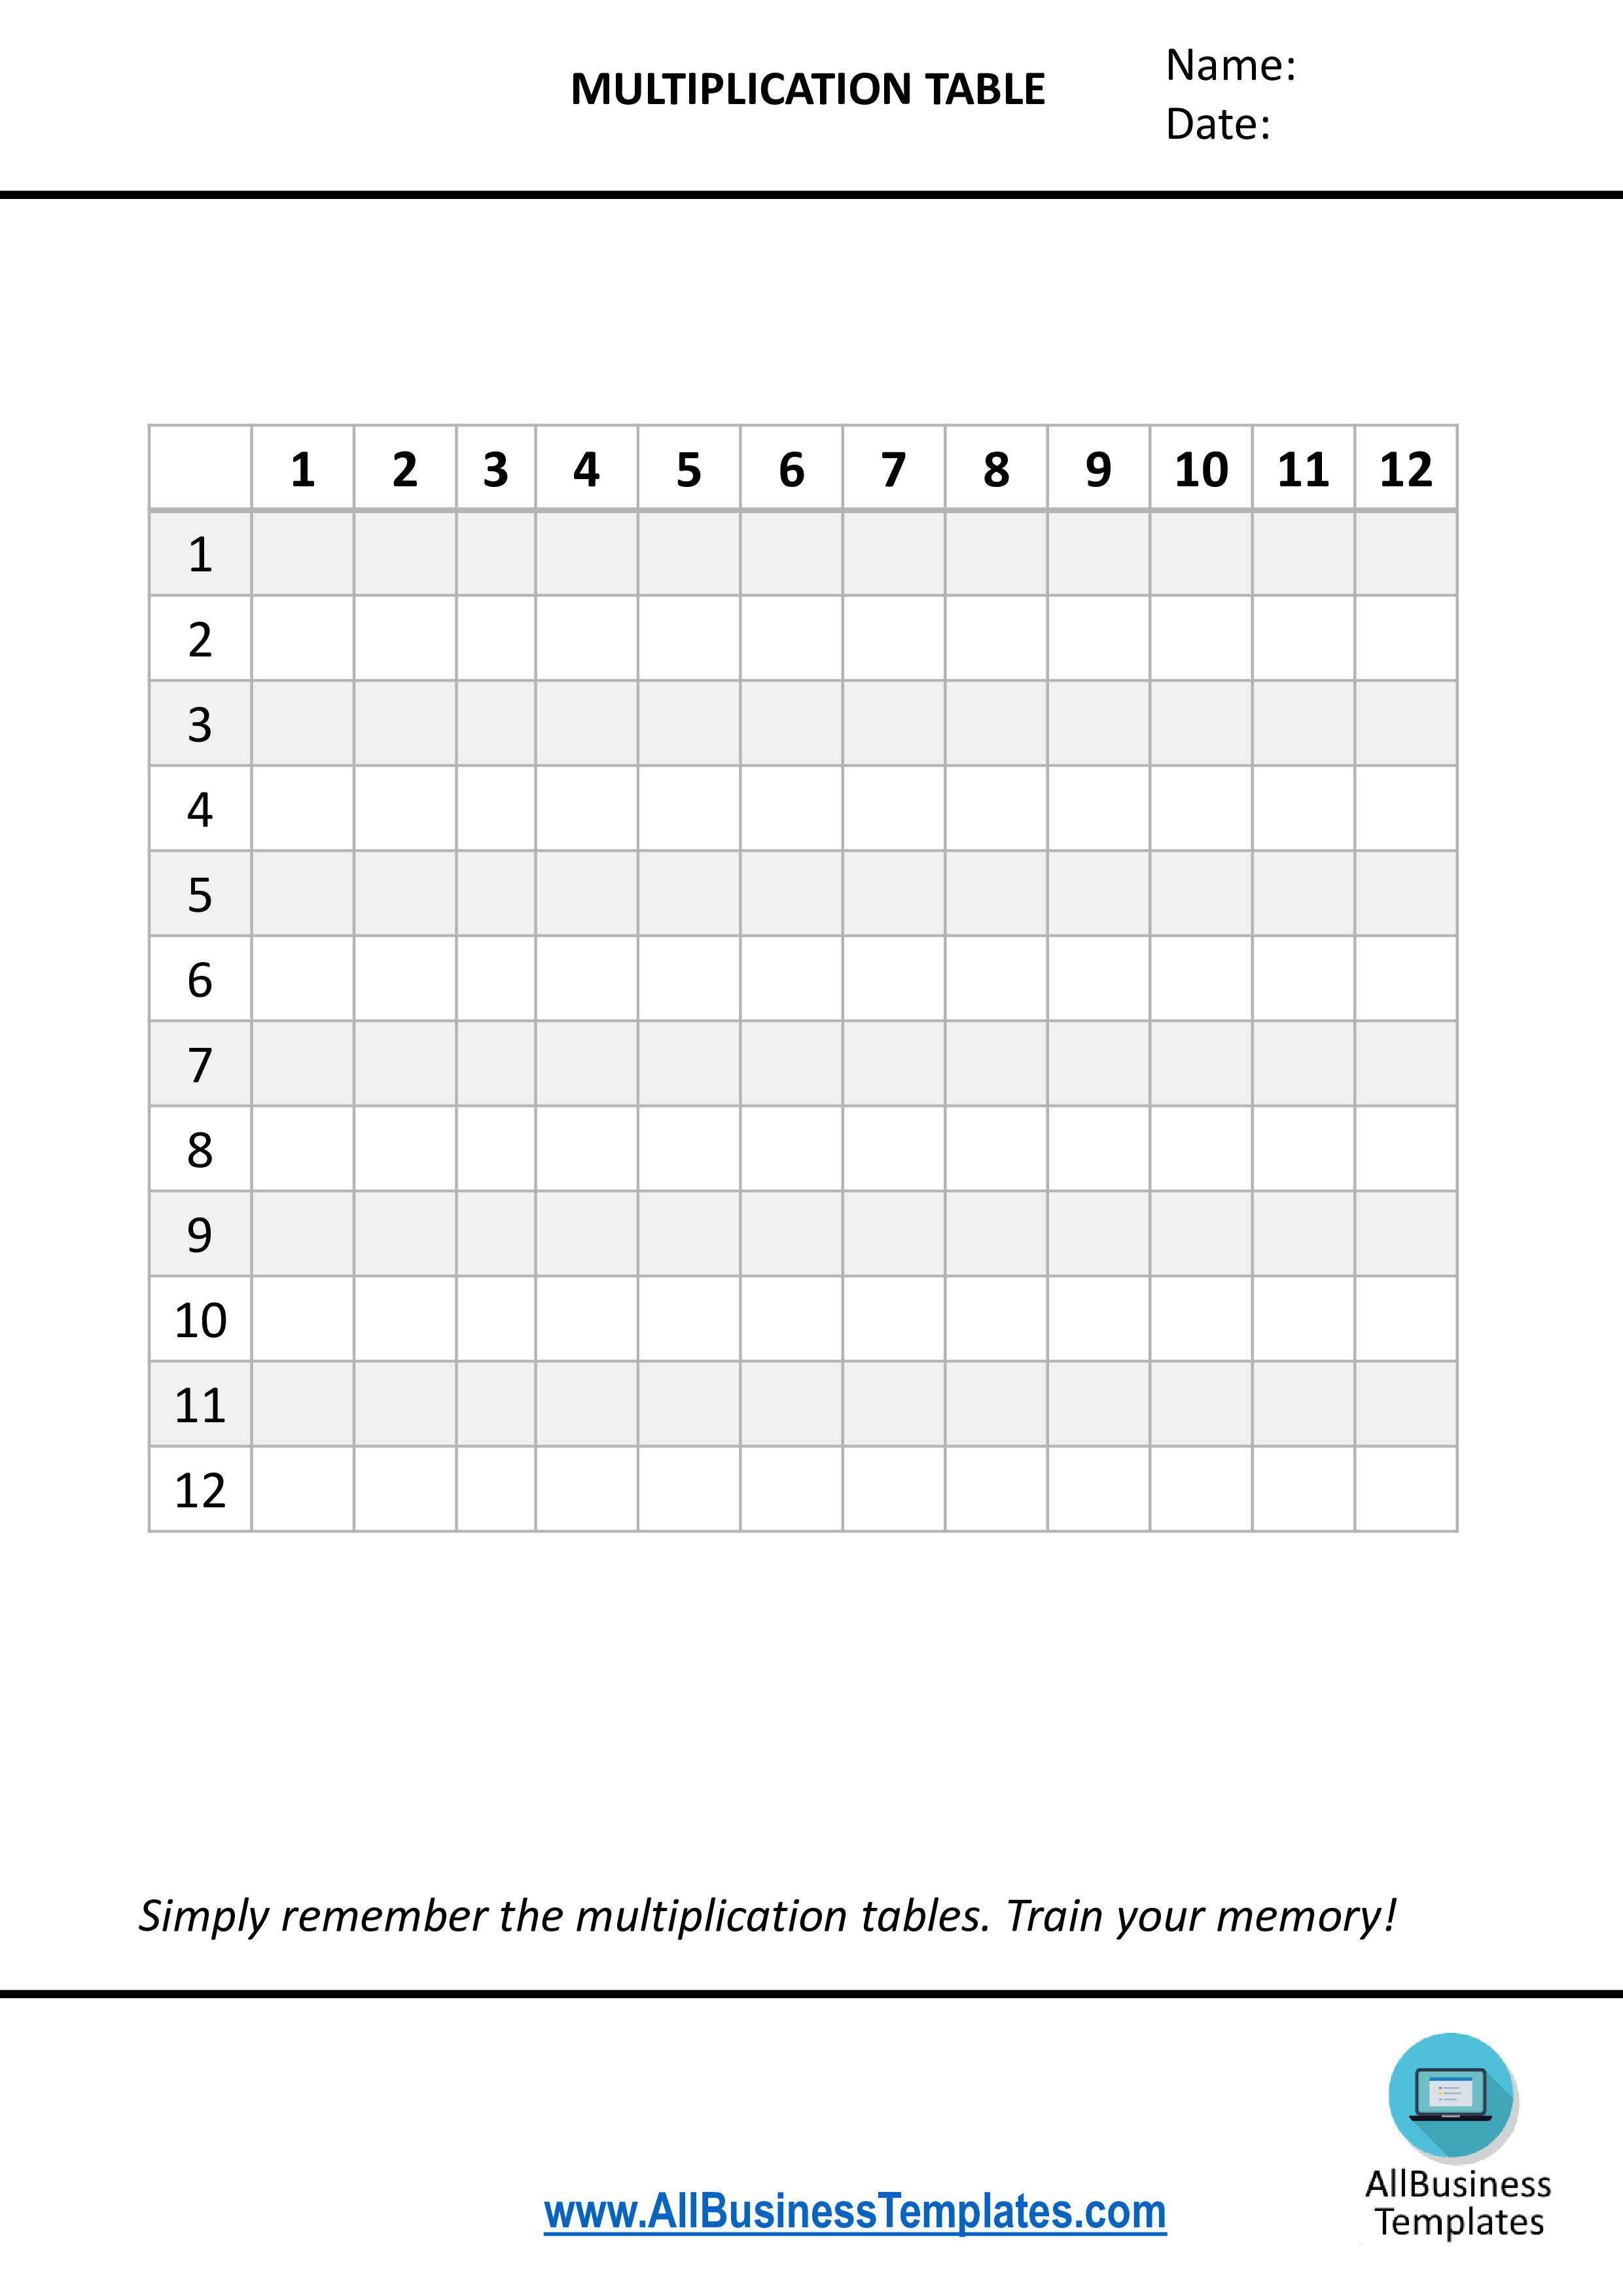 Multiplication Tables main image